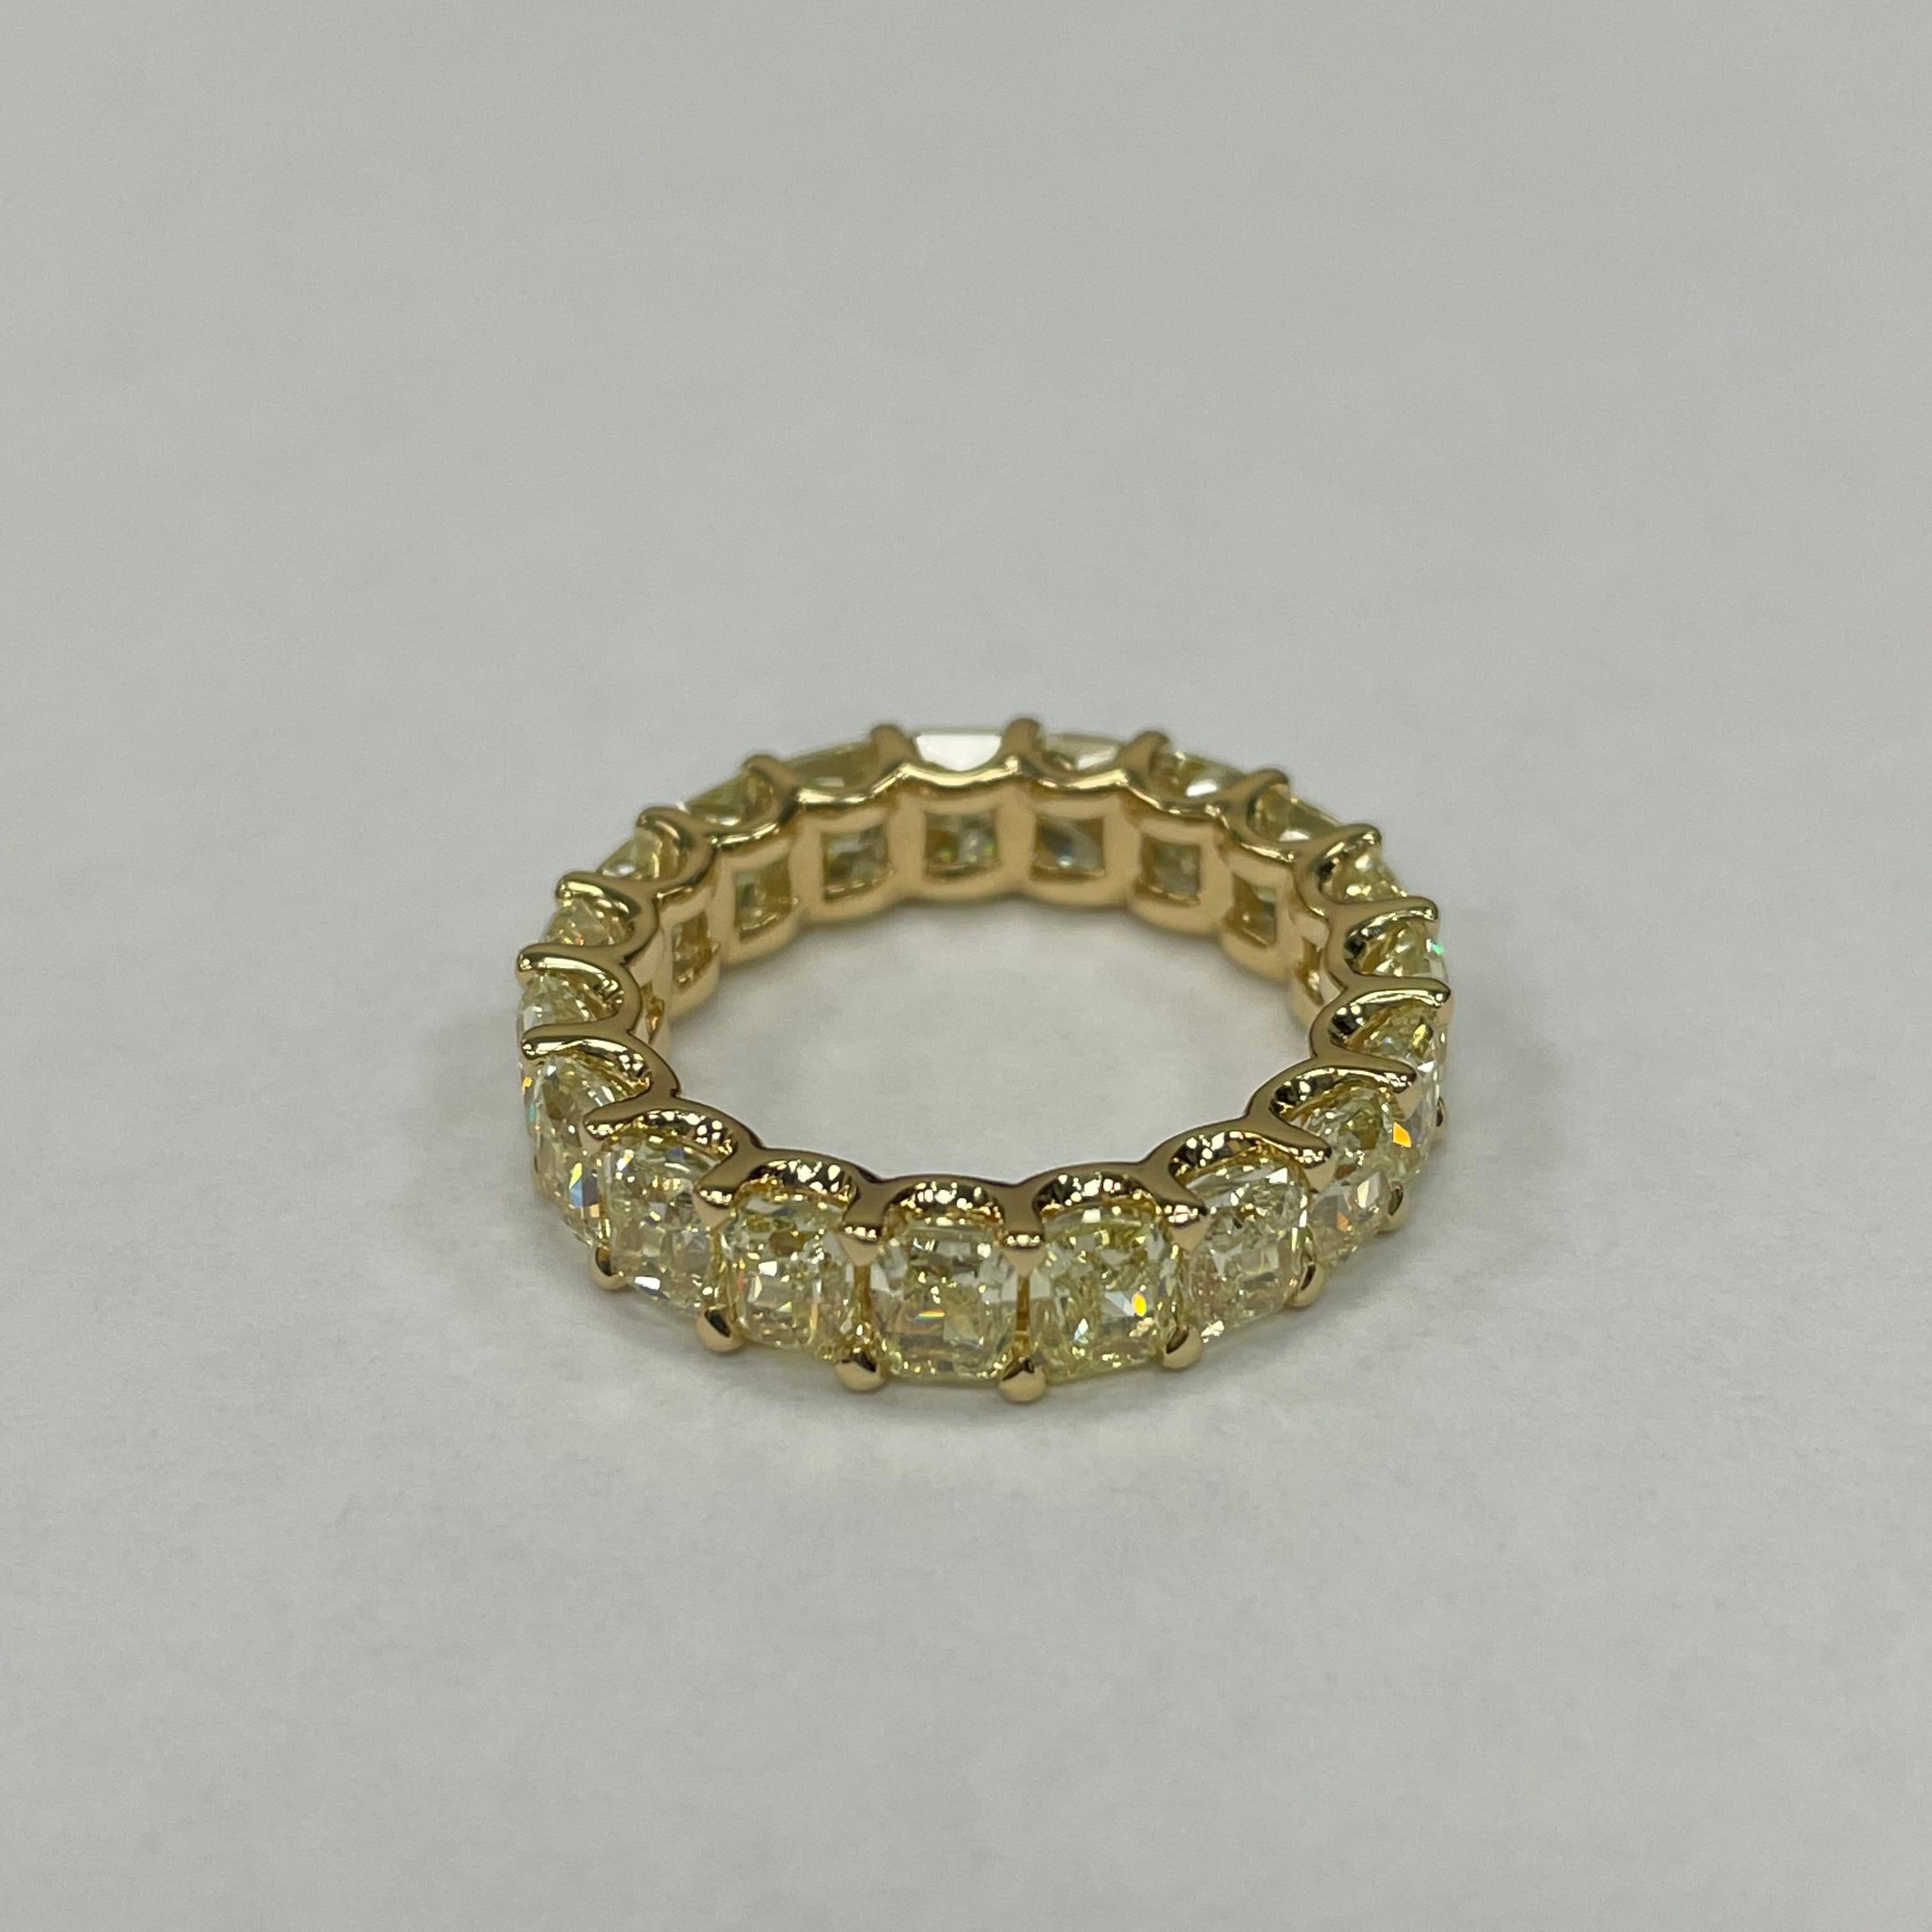 18K yellow gold eternity Band featuring radiant-cut yellow diamonds with a high polish finish. Totalling 19 pieces of brillant cut radiant diamonds, weighing 6.339 carats, the width is 4mm. 
Ring size only can sizing down to US#5, cannot sizing it